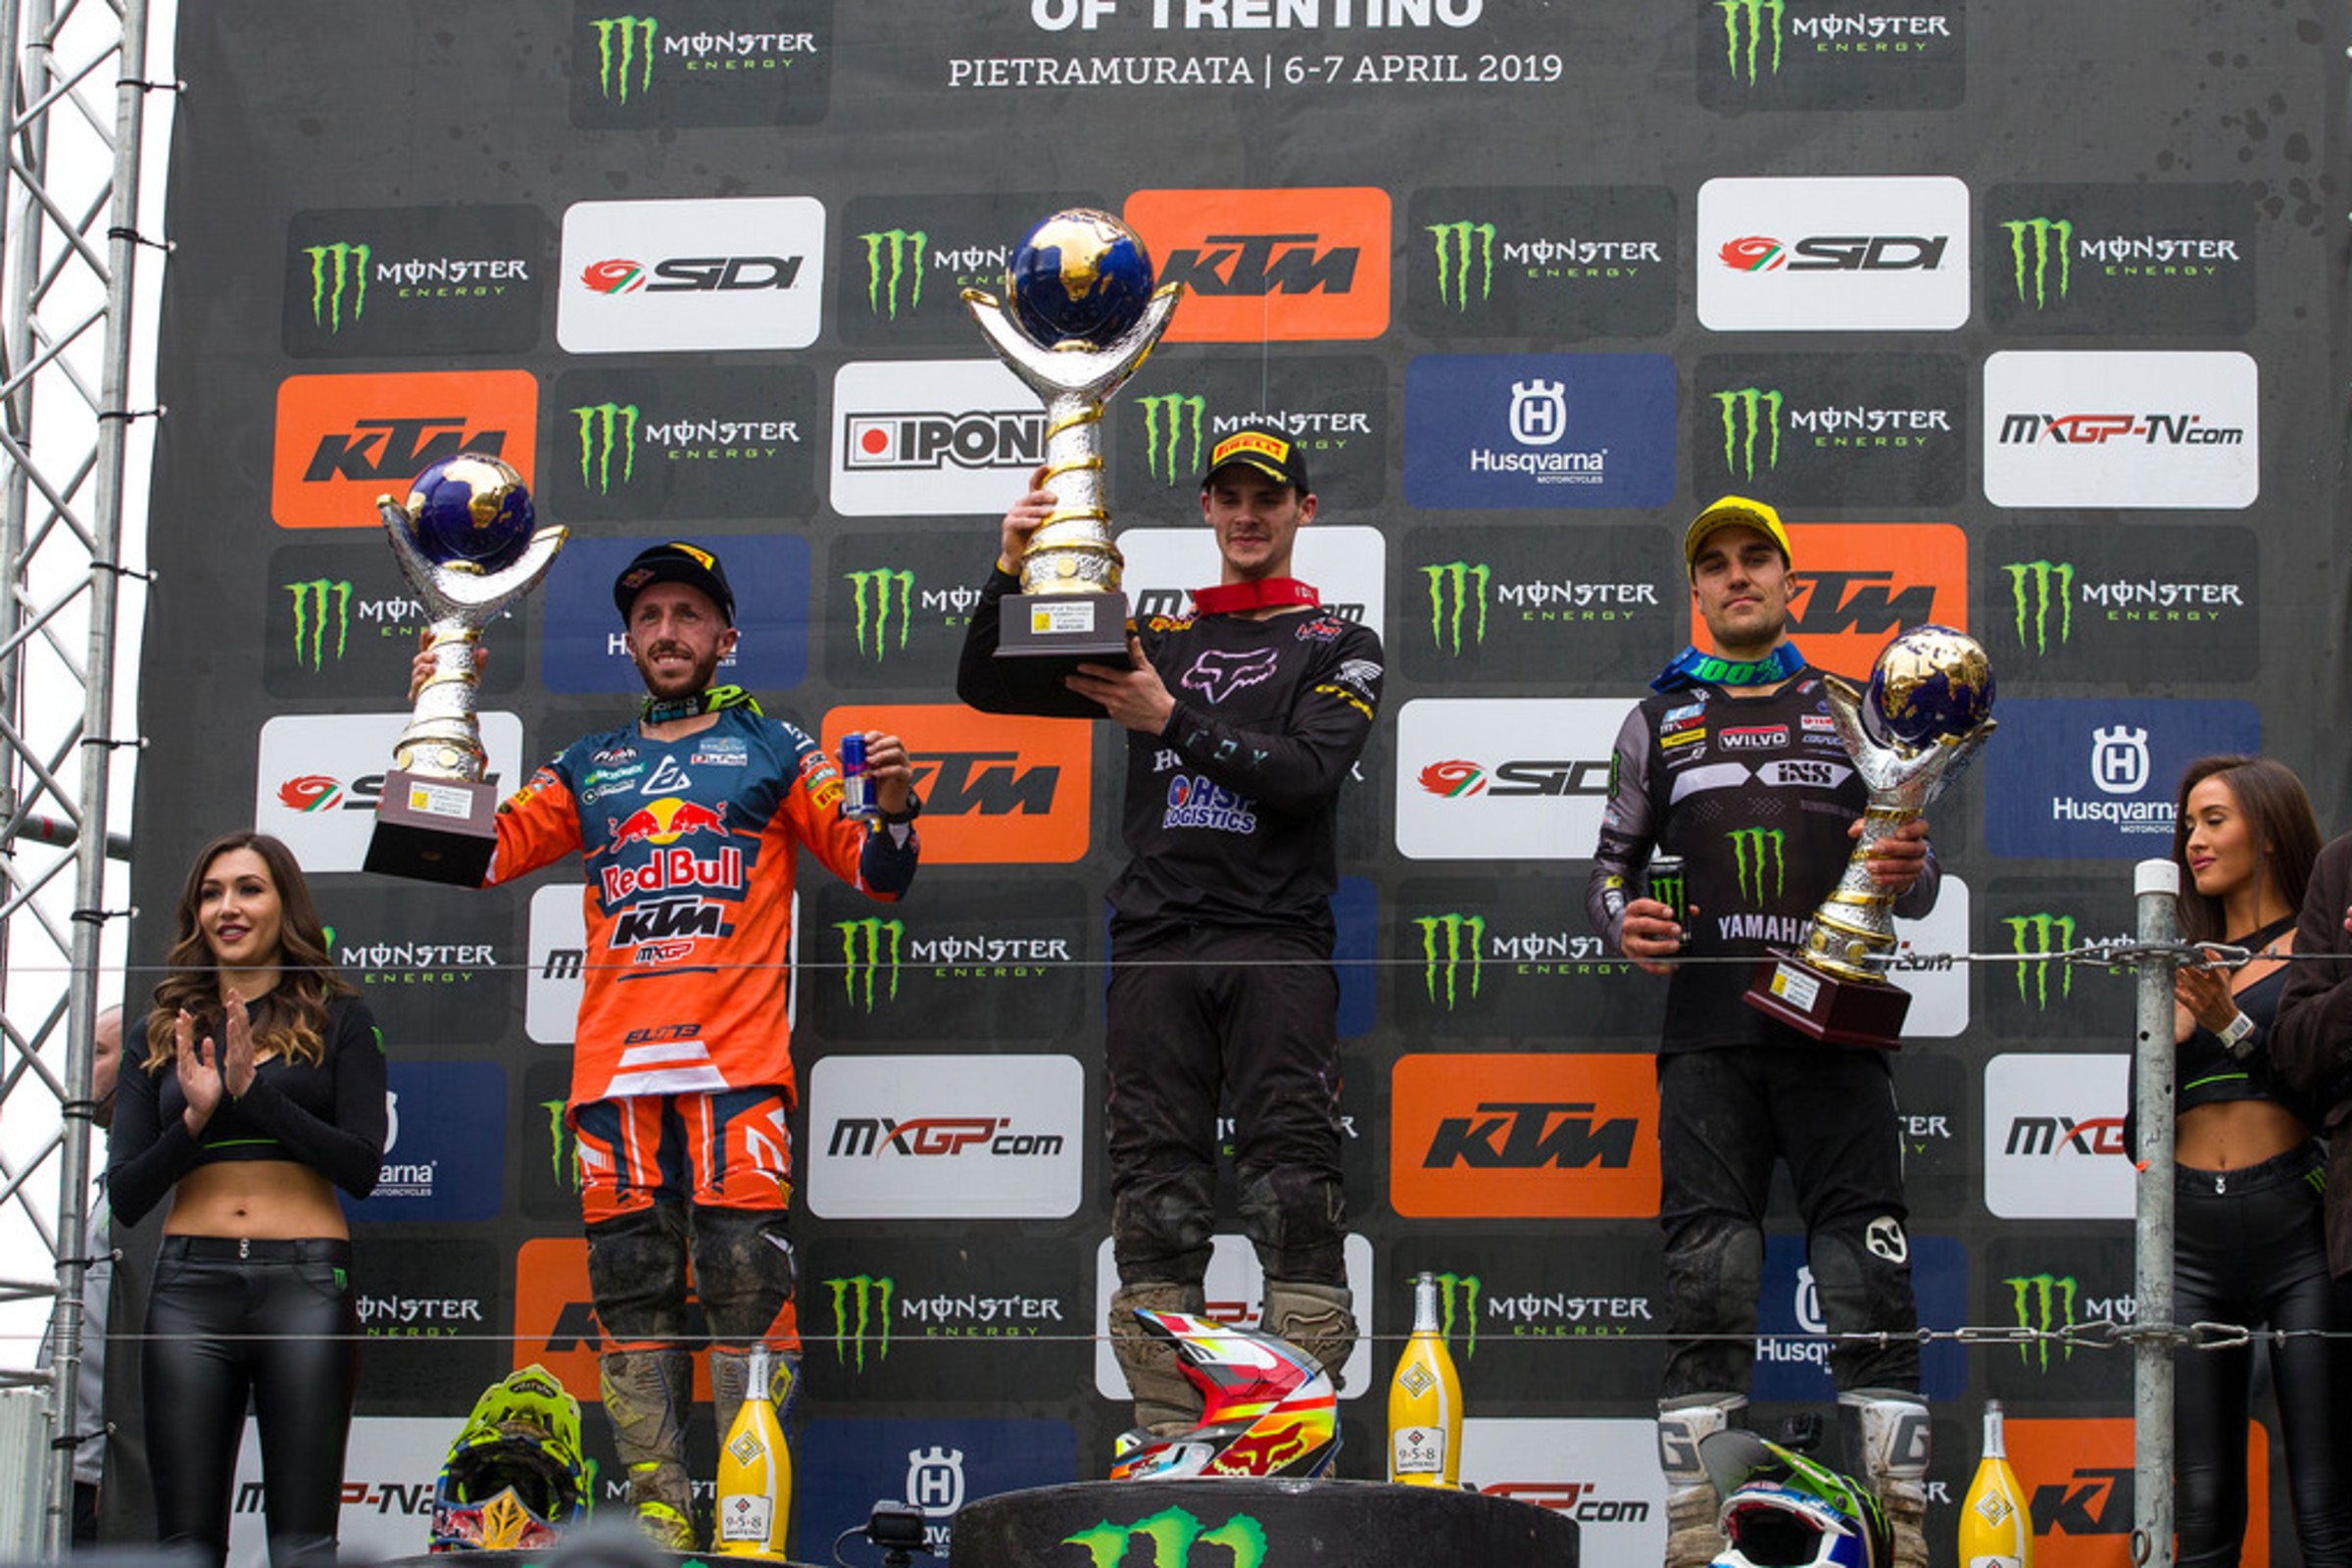 3 Things We Learned at the 2019 MXGP of Trentino - Racer X